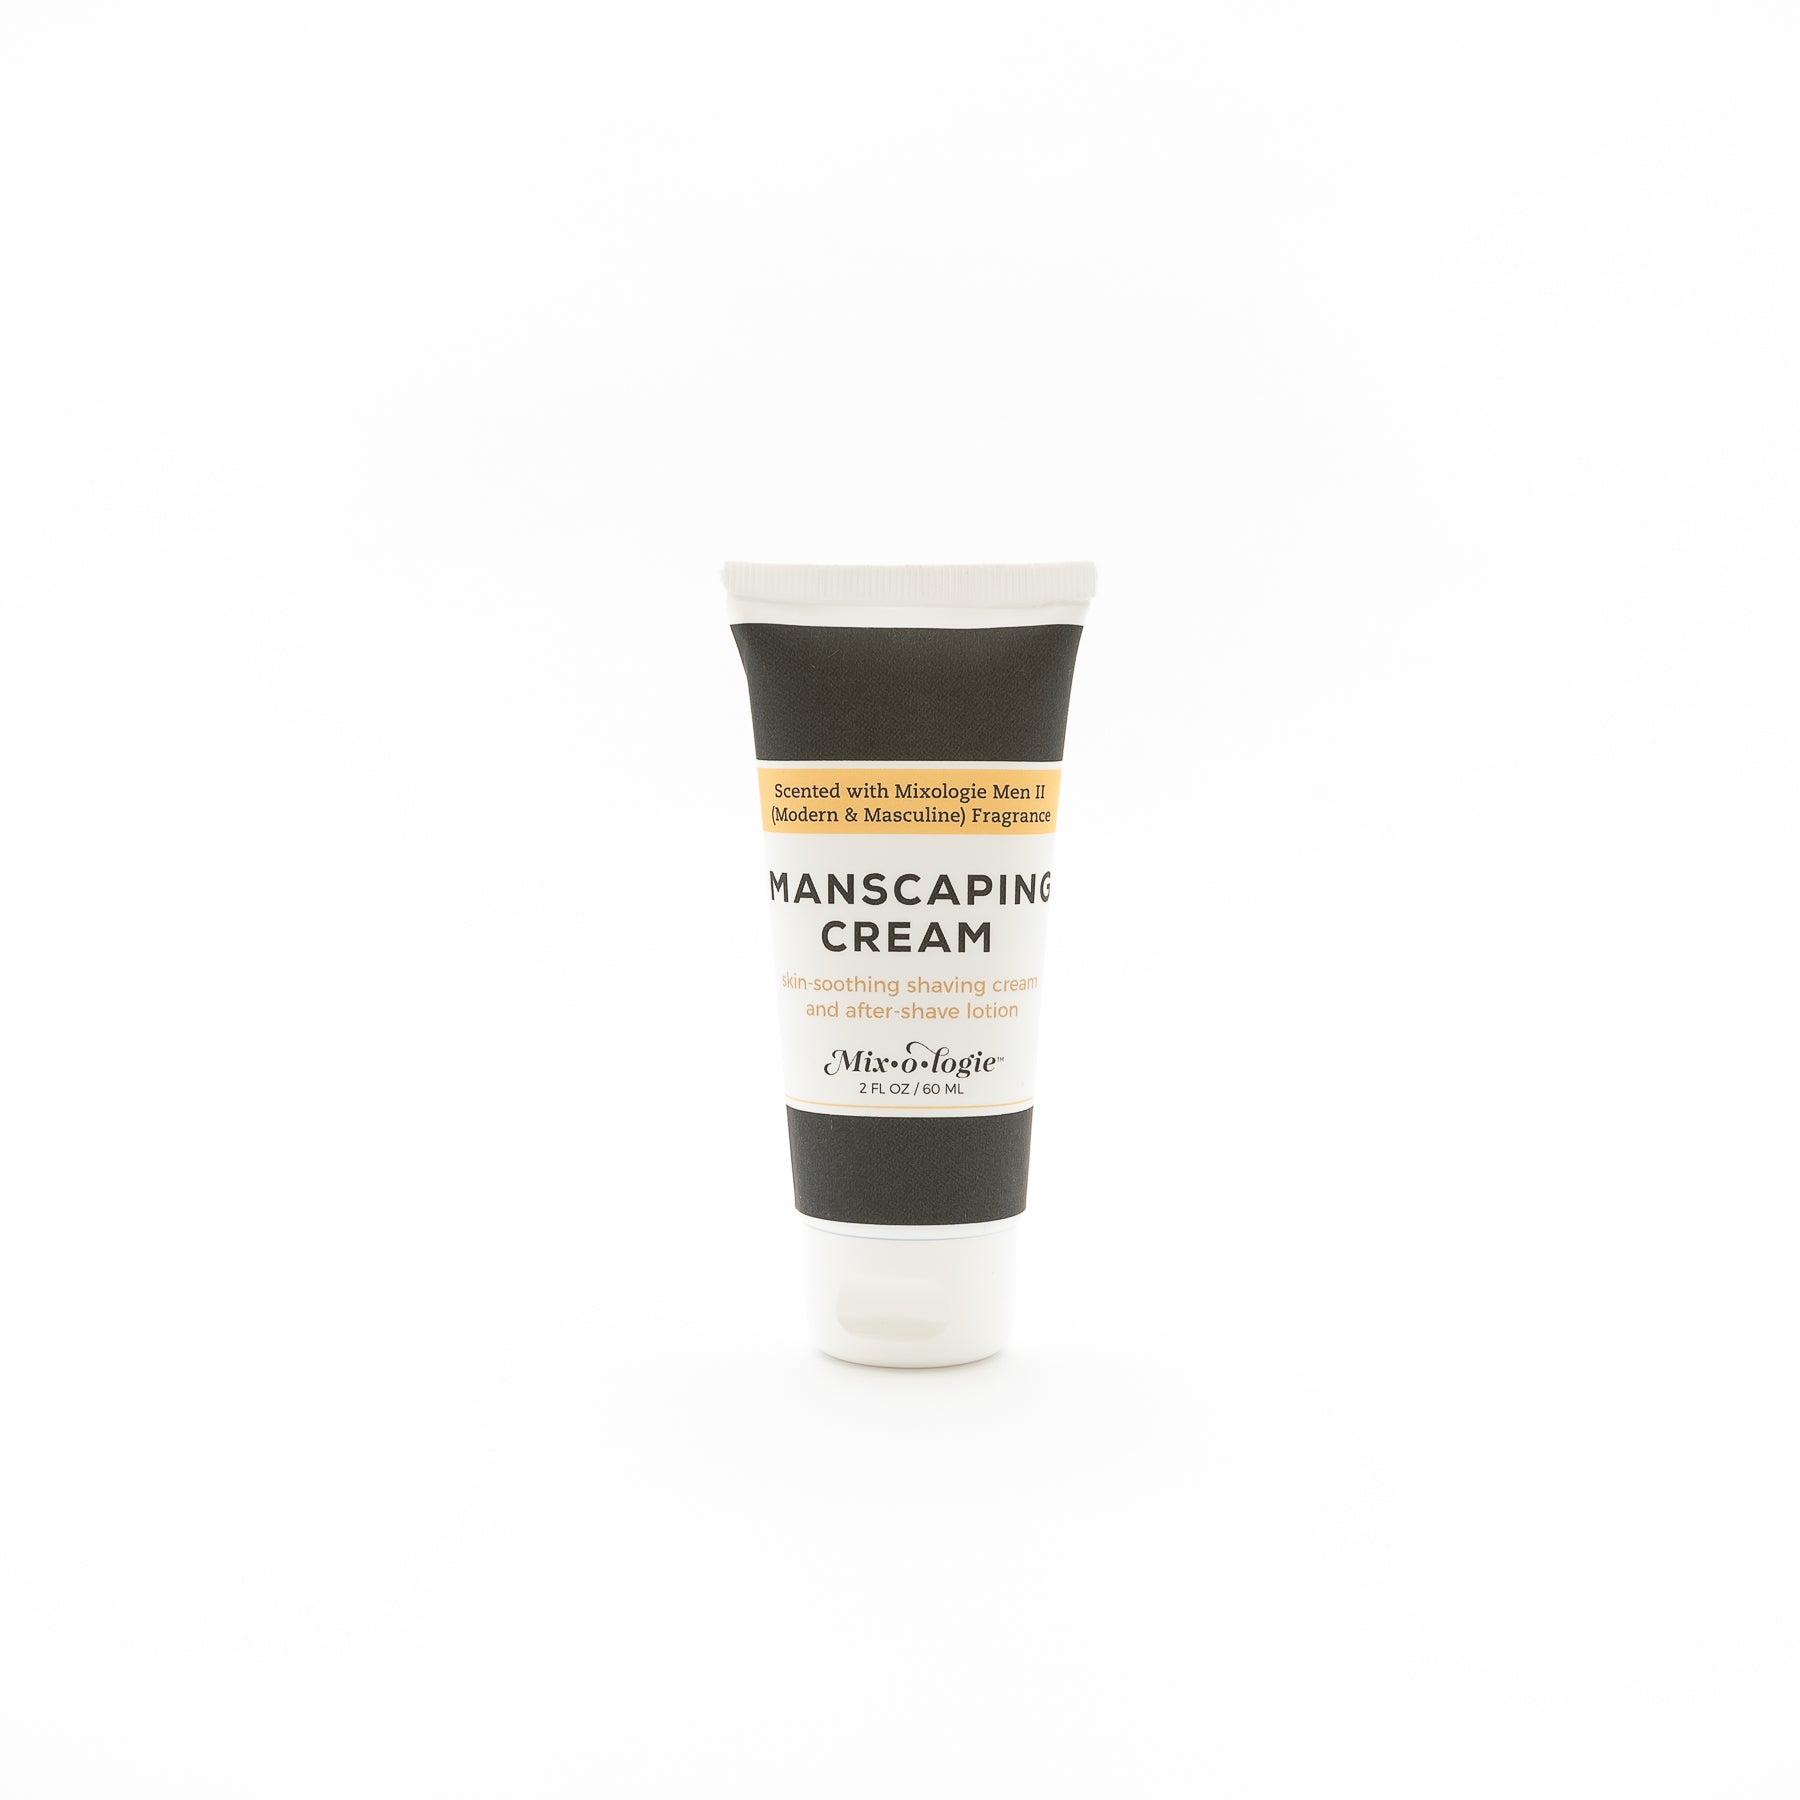 Manscaping cream - Skin smoothing shaving cream and after shave lotion scented with Mixologie's Men's II (Modern and Masculine) fragrance in 60 mL plastic tube.